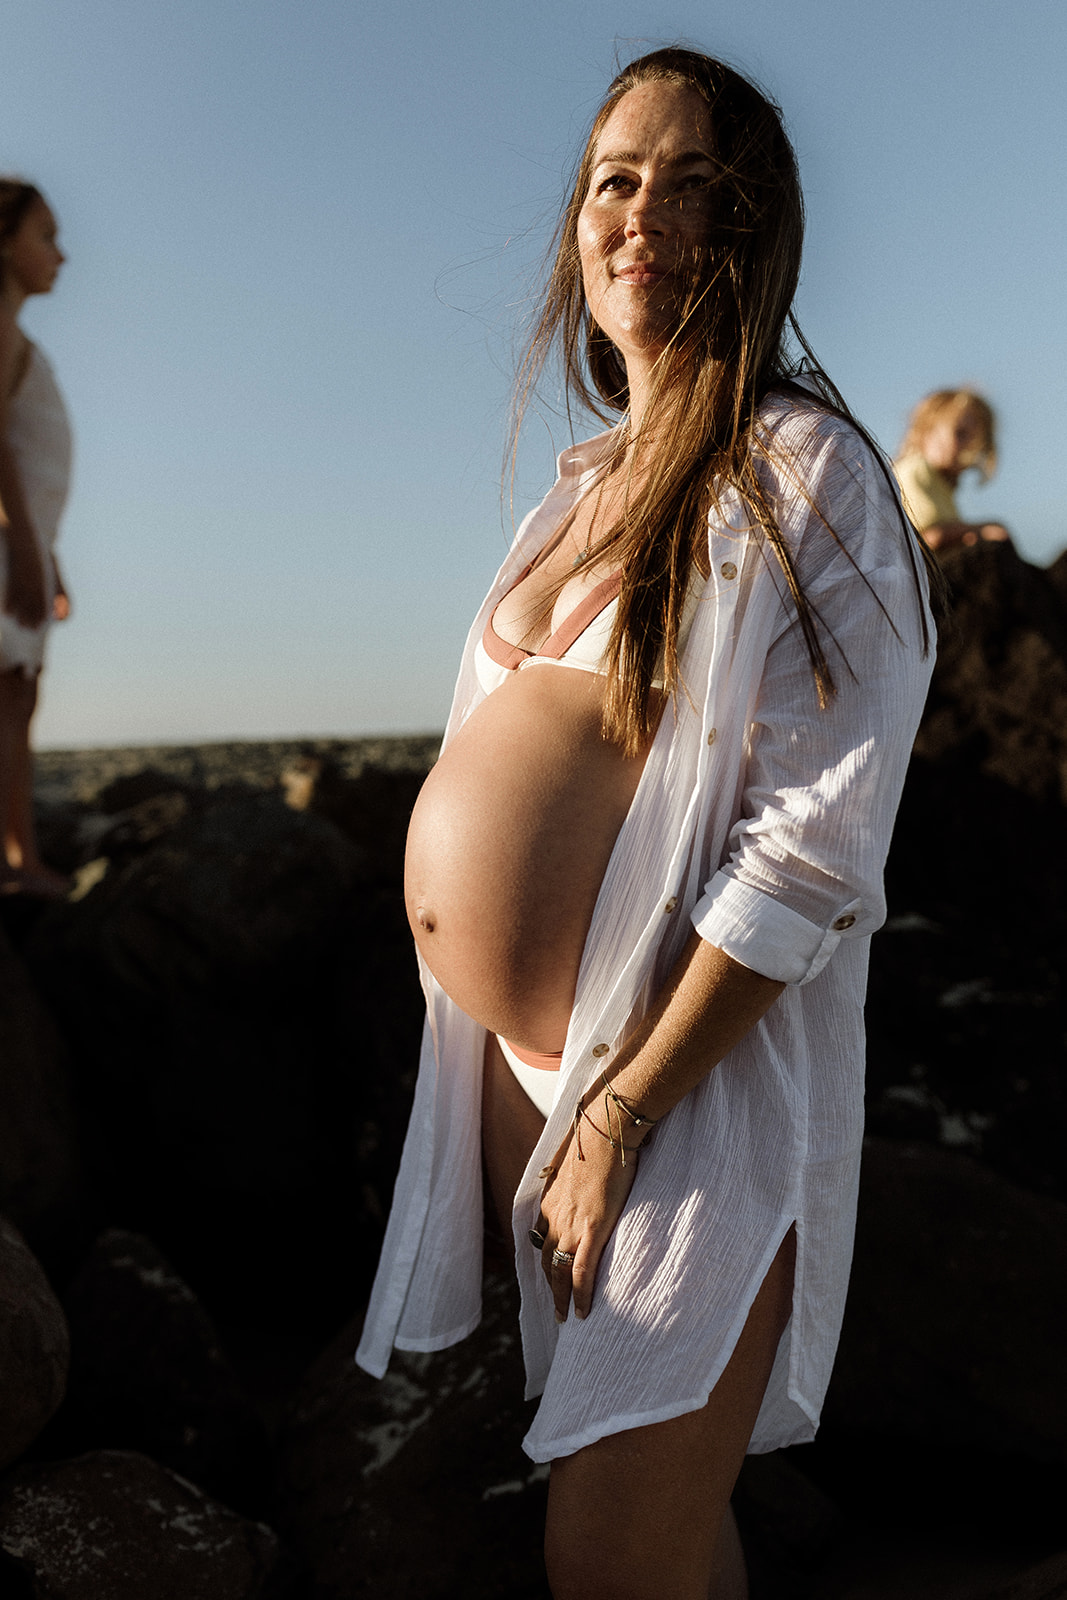 A Gold Coast Family welcoming baby number 3 with a maternity session on the beach